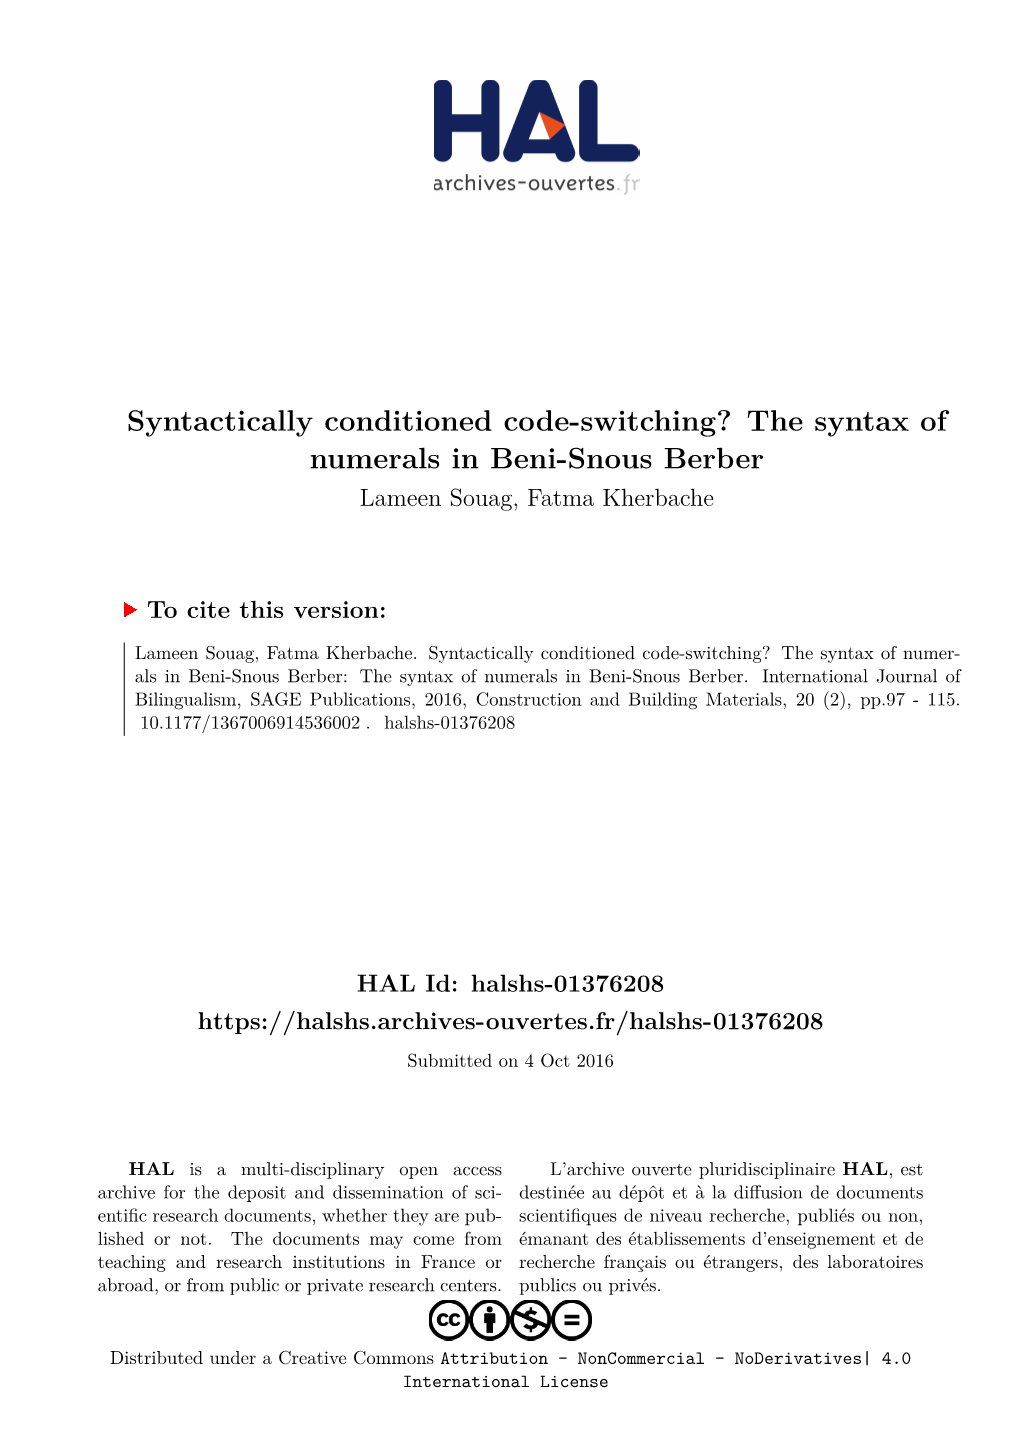 Syntactically Conditioned Code-Switching? the Syntax of Numerals in Beni-Snous Berber Lameen Souag, Fatma Kherbache